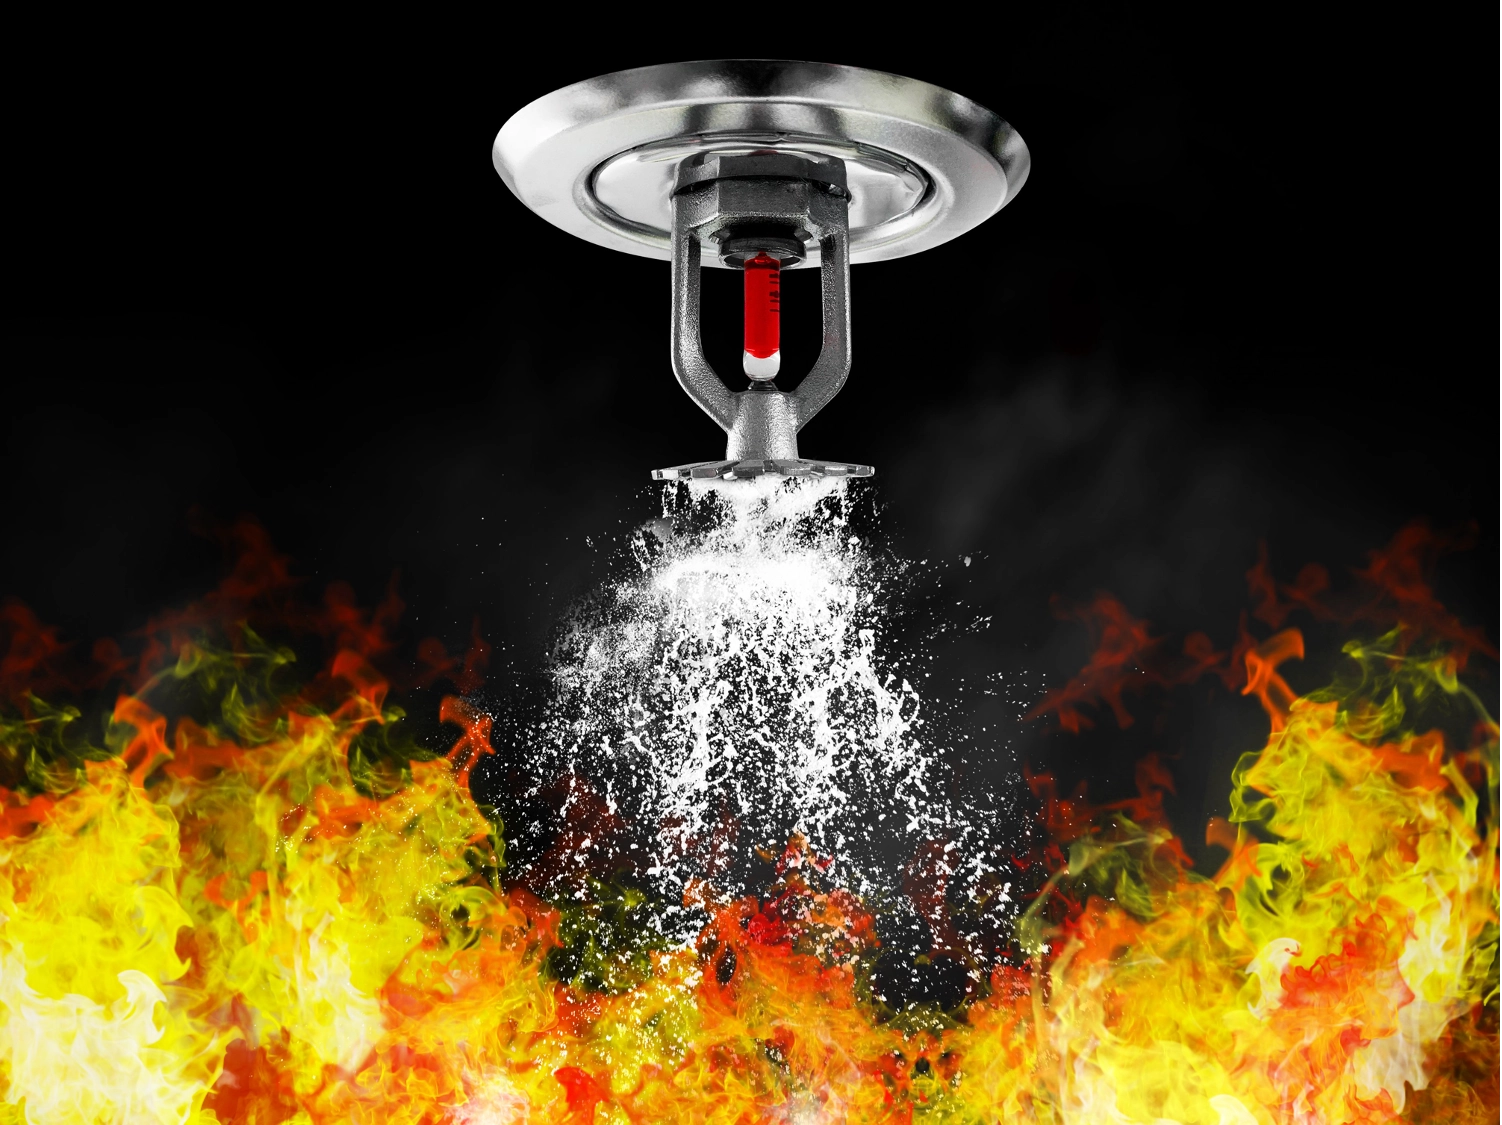 Fire suppression safety